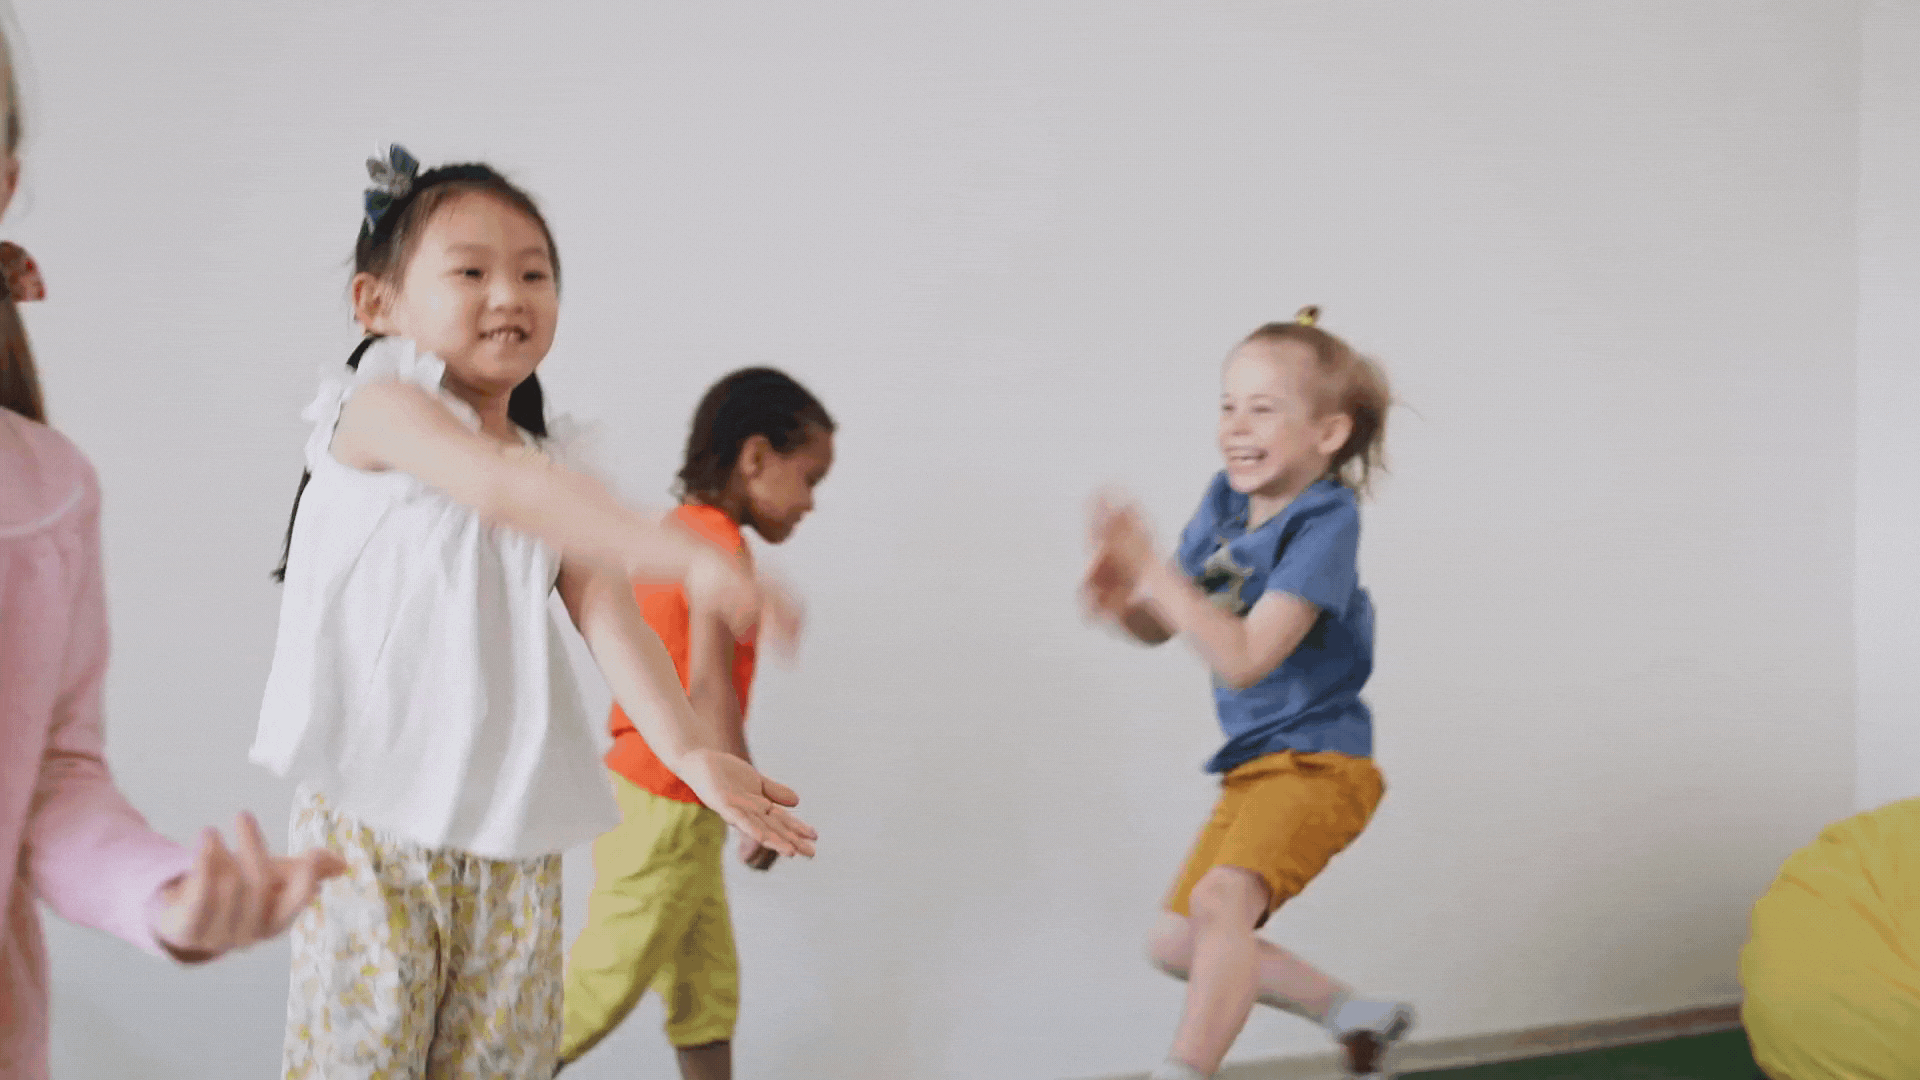 GIF of children jumping and dancing